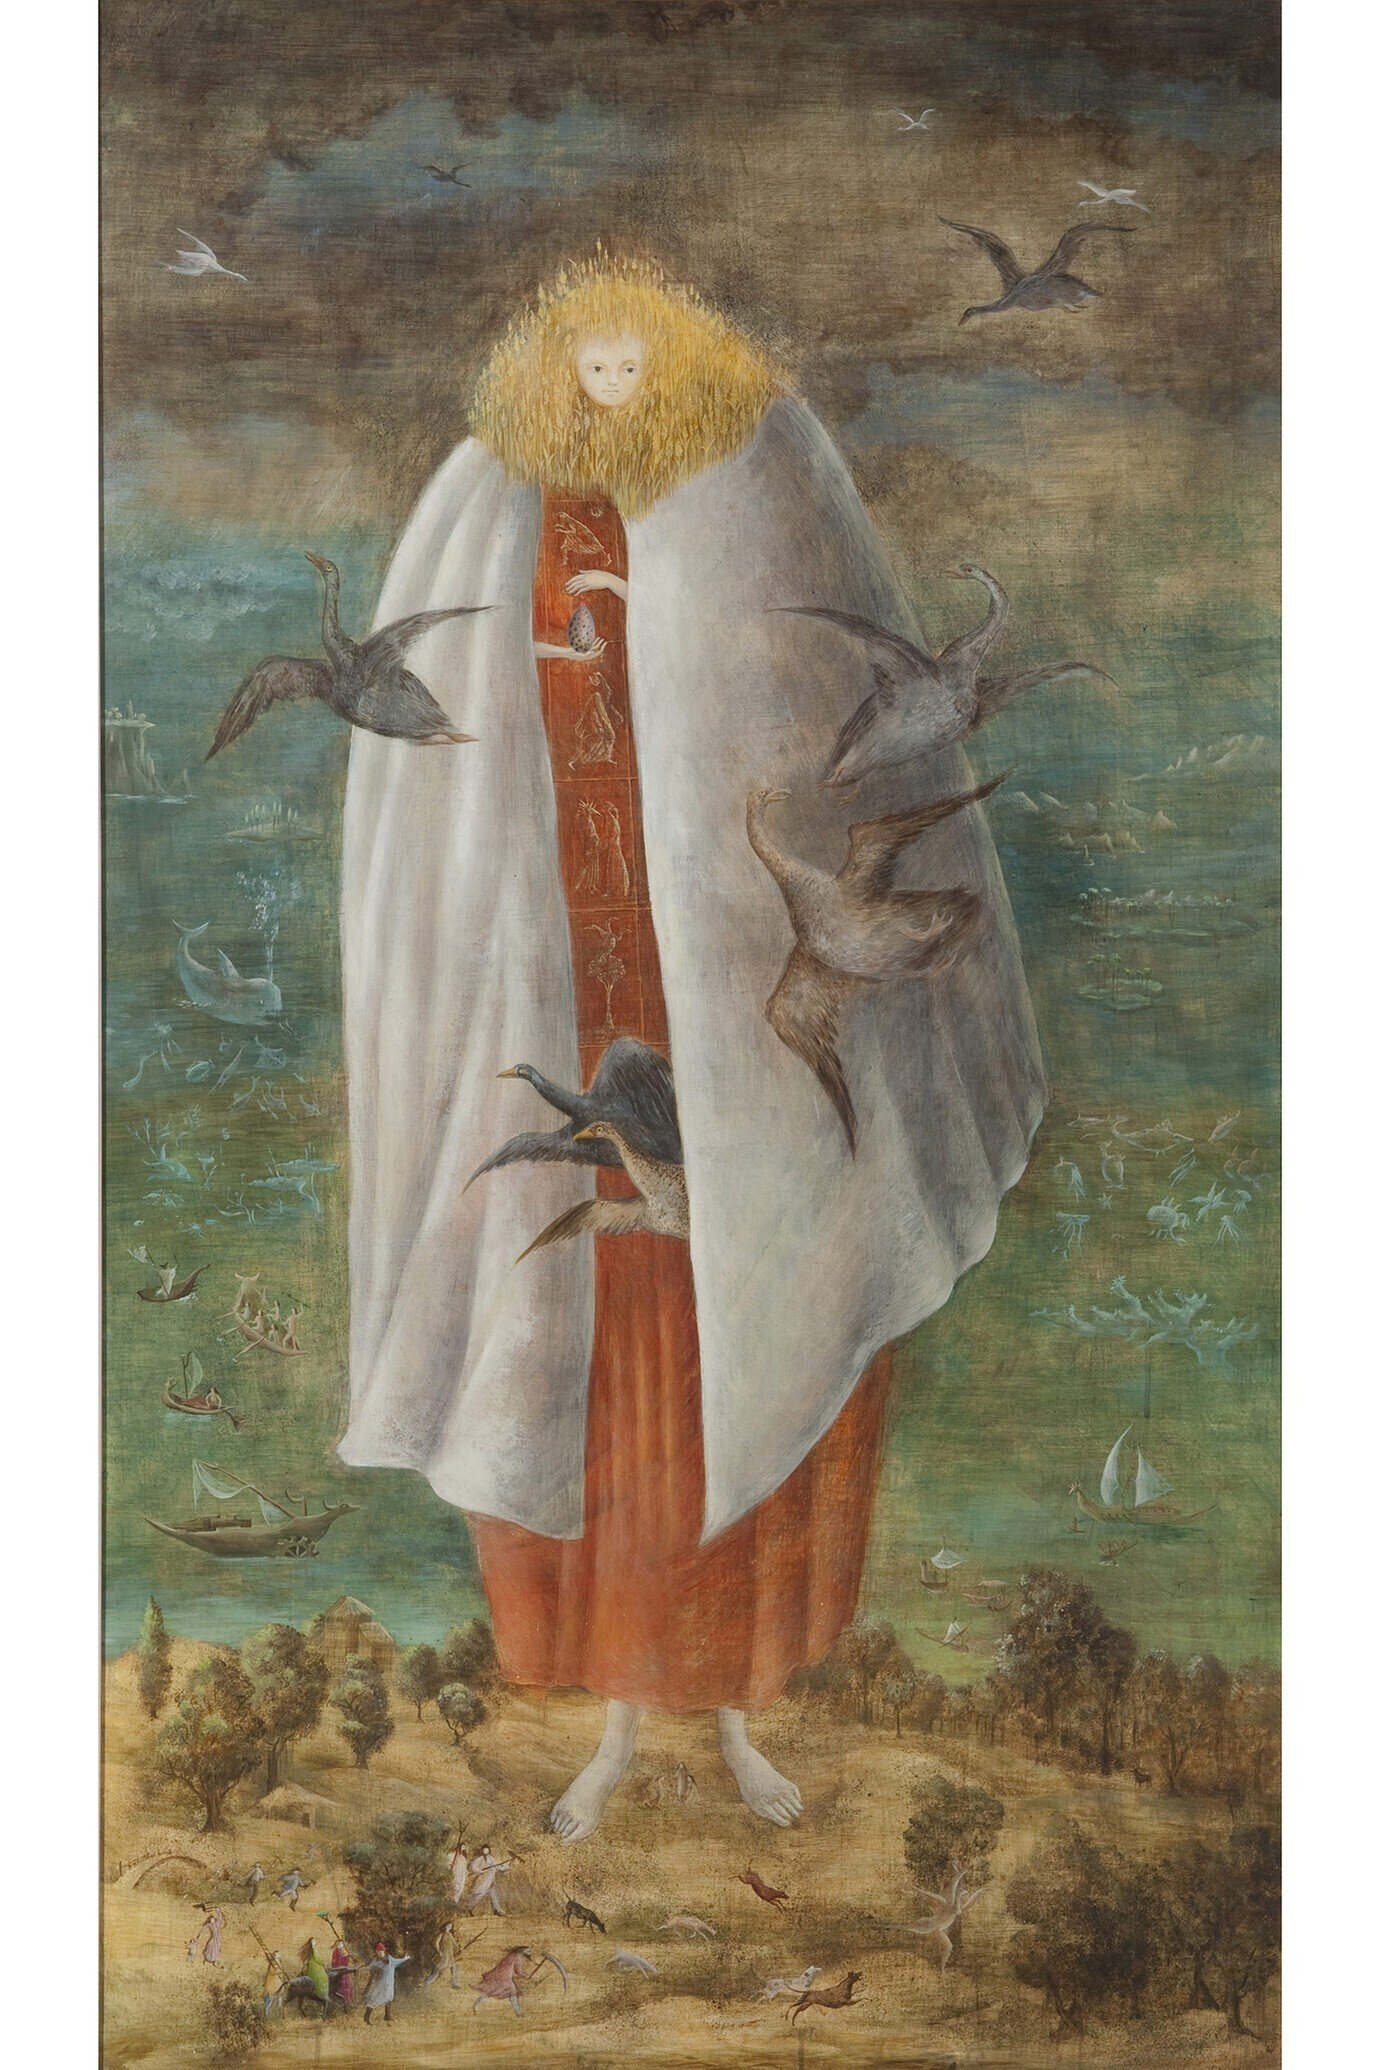 Leonora Carrington, The Giantess (The Guardian of the Egg), 1947, private collection. 